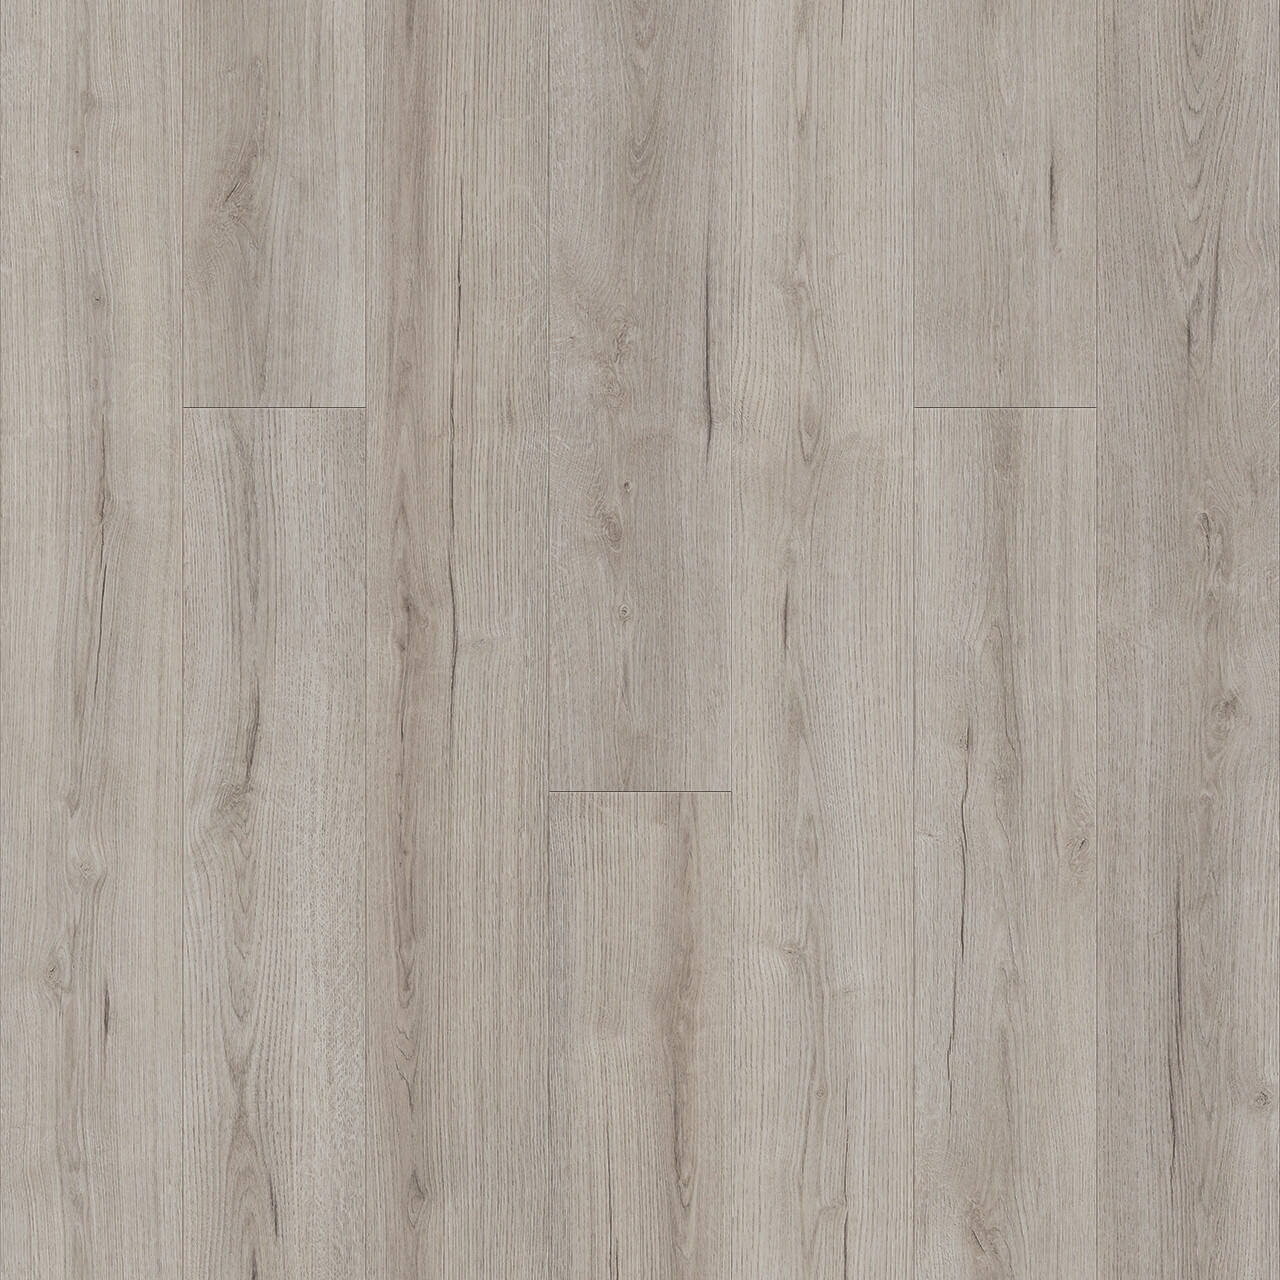 Engineered Floors - Wood Lux Collection - 8 in. x 54 in. - Faroe Island